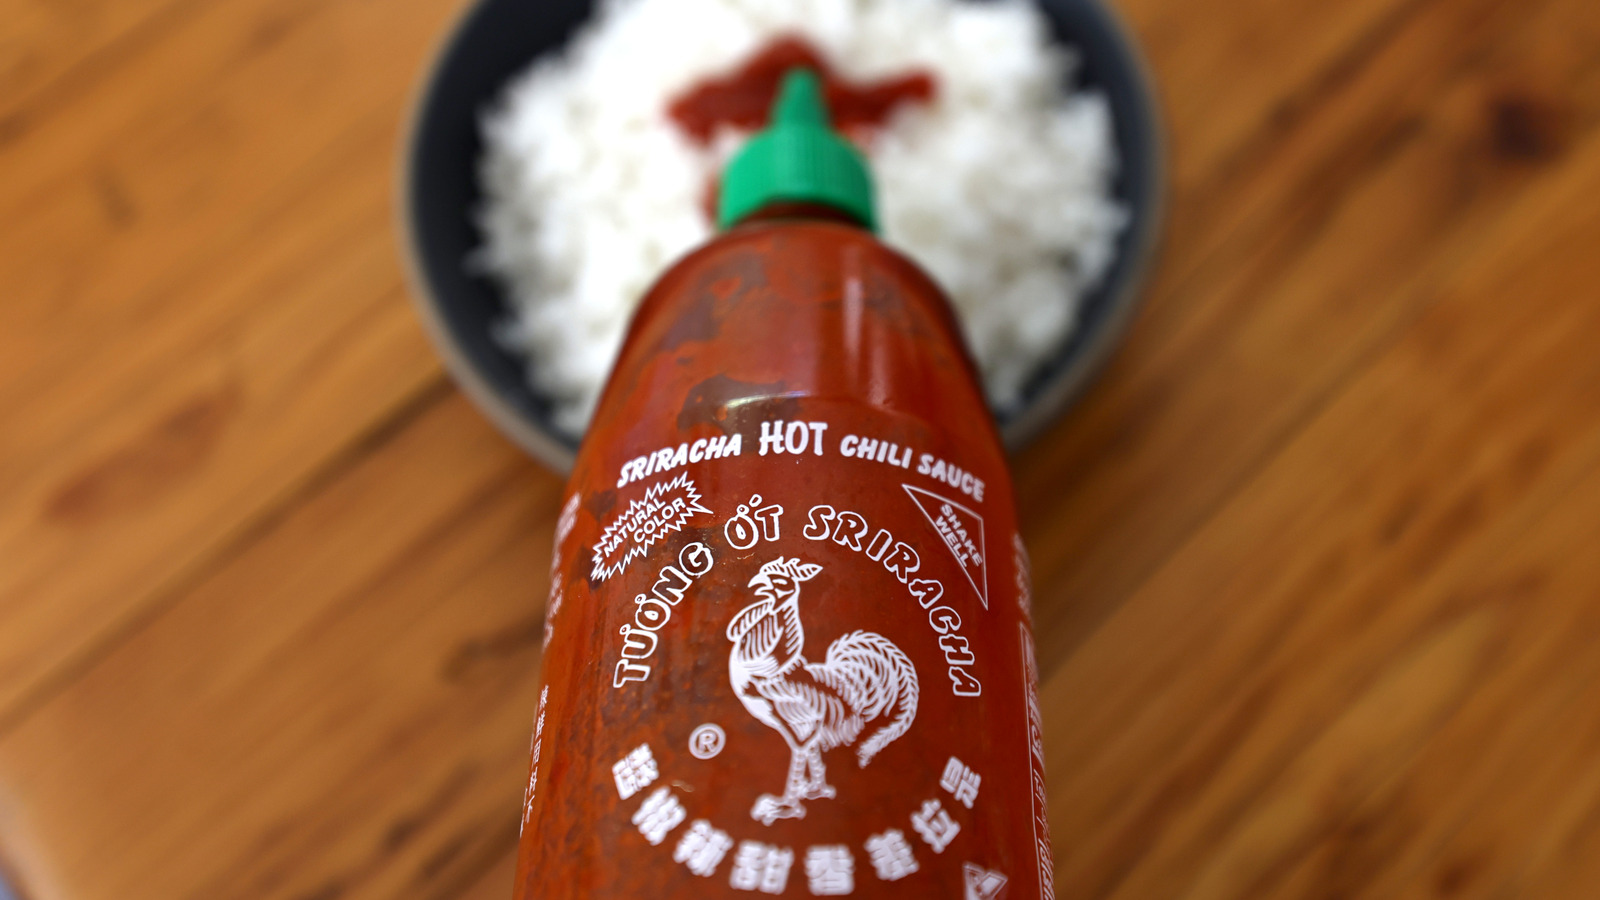 Some Like It Hot! Make Your Own Hot Sauce